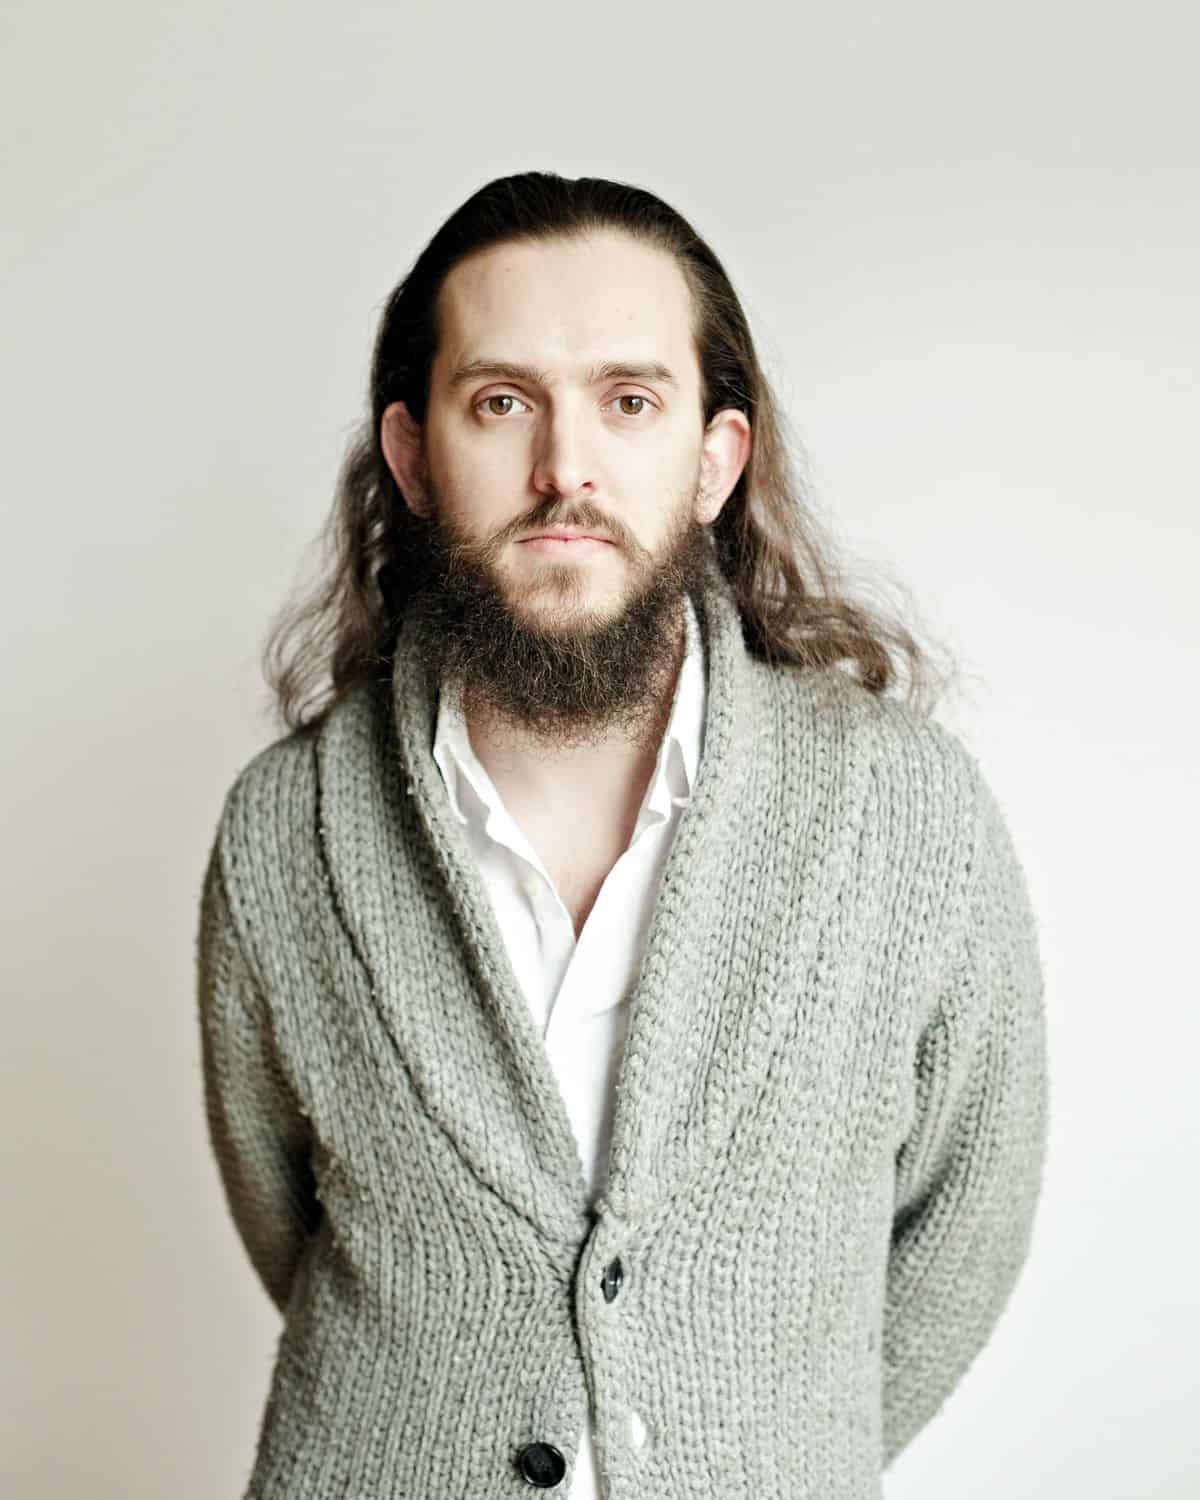 A photo of digital marketing consultant and UX designer Thomas Deneuville wearing a gray sweater, taken by Axel Dupeux.